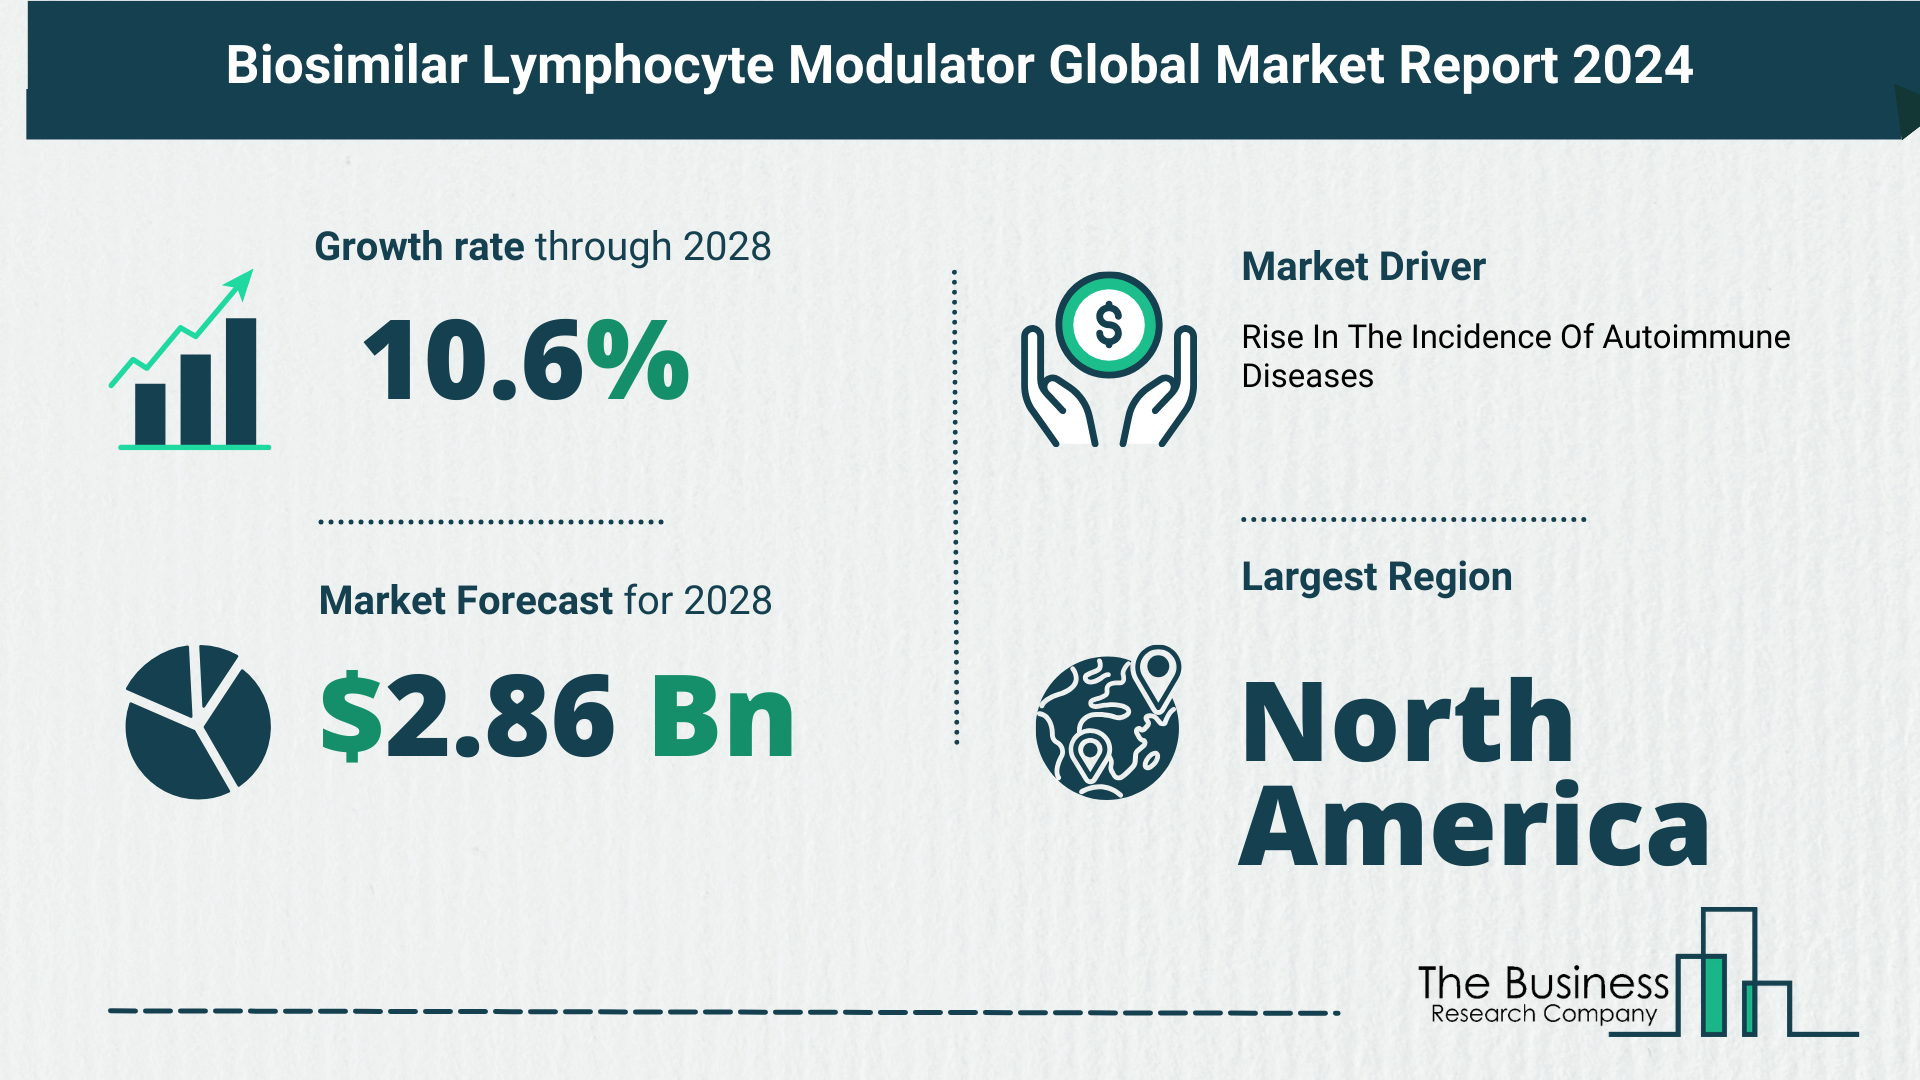 Comprehensive Analysis On Size, Share, And Drivers Of The Biosimilar Lymphocyte Modulator Market